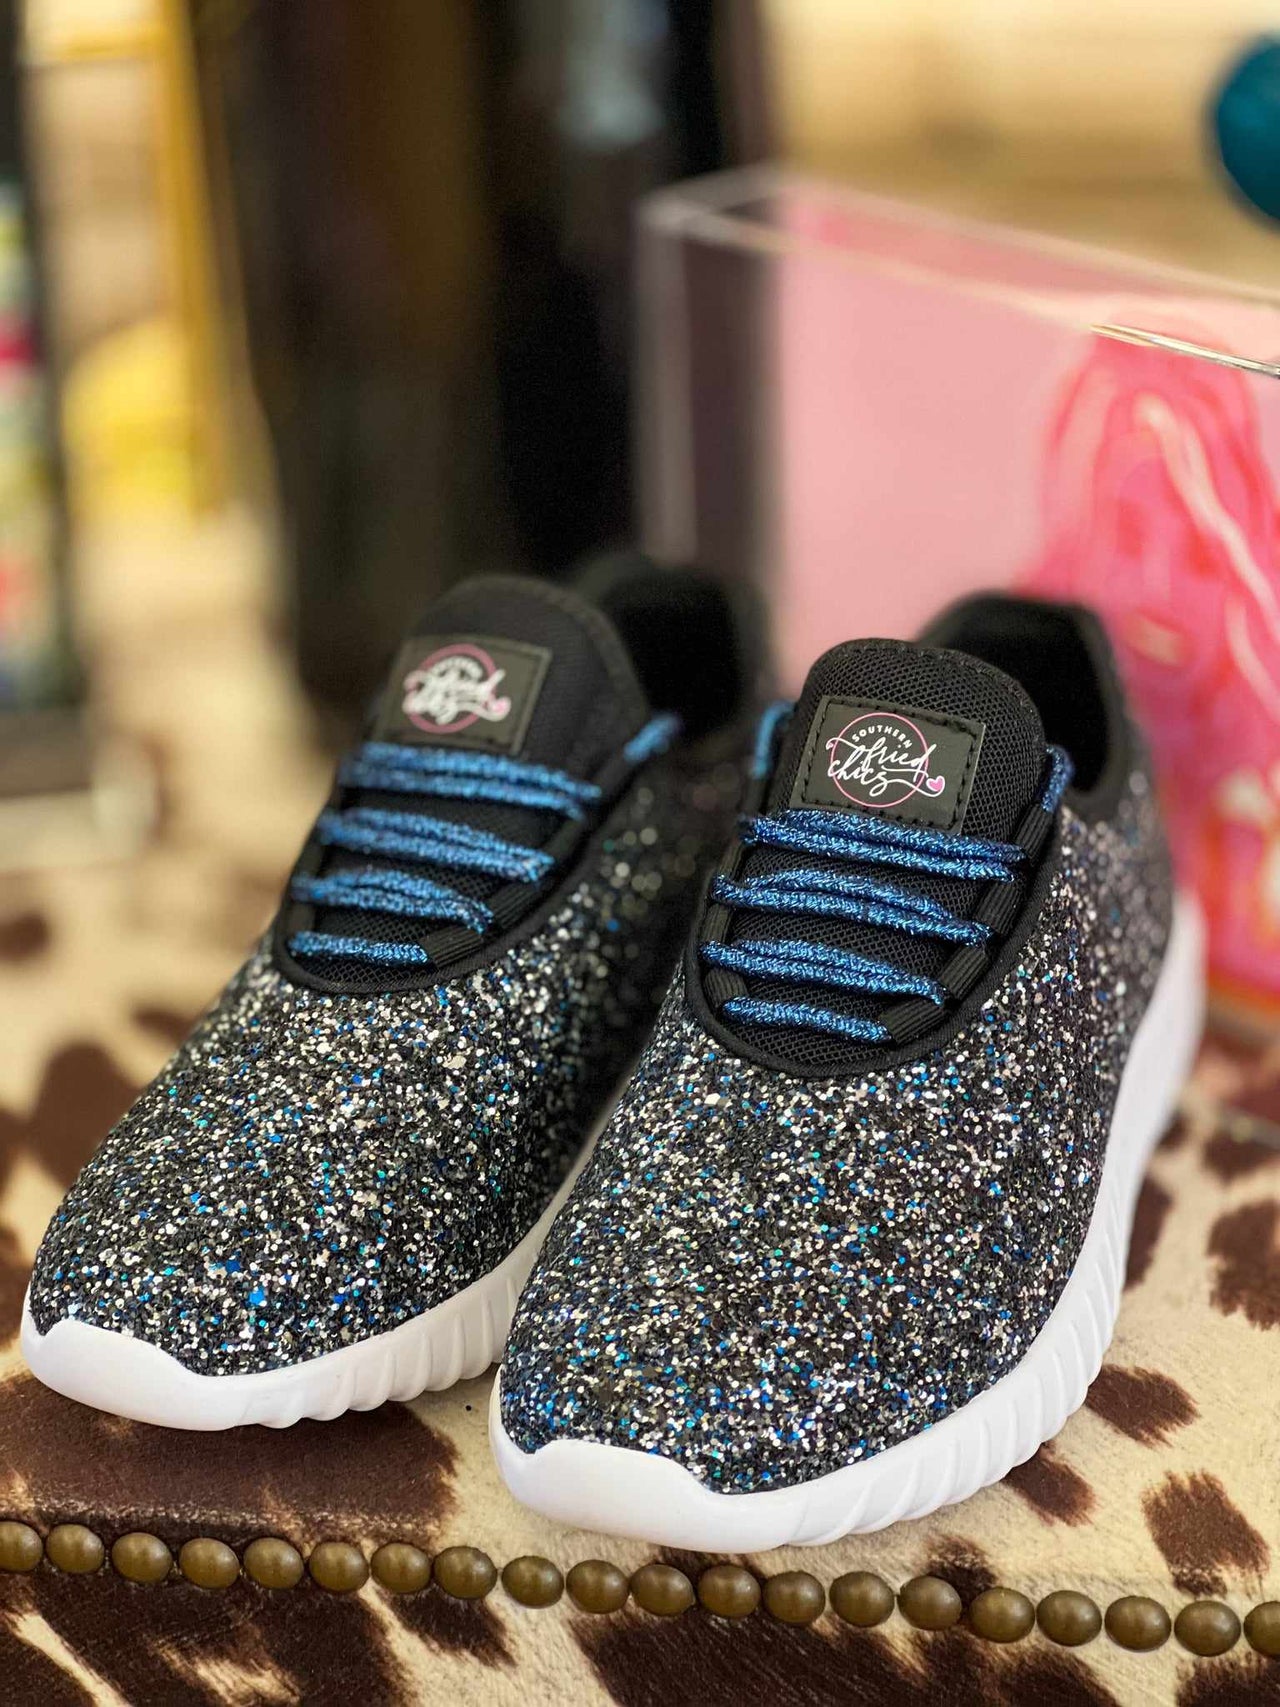 Black and blue glitter sneakers.